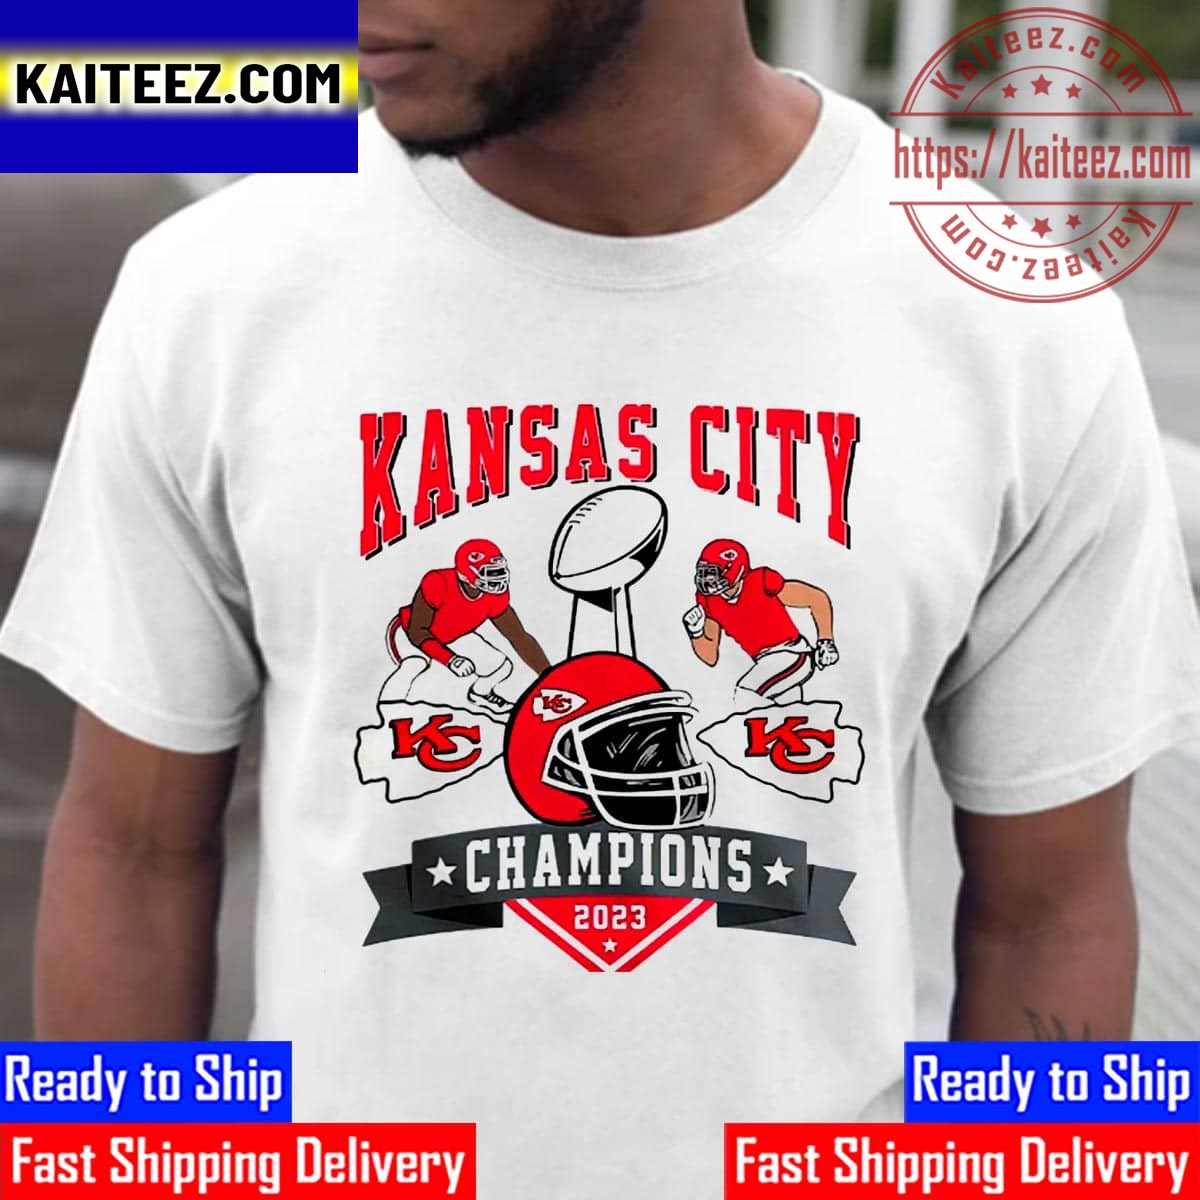 Chiefs 2023 Champions Super Bowl Lvii Shirt by Vintagenclassic Tee Store -  Issuu